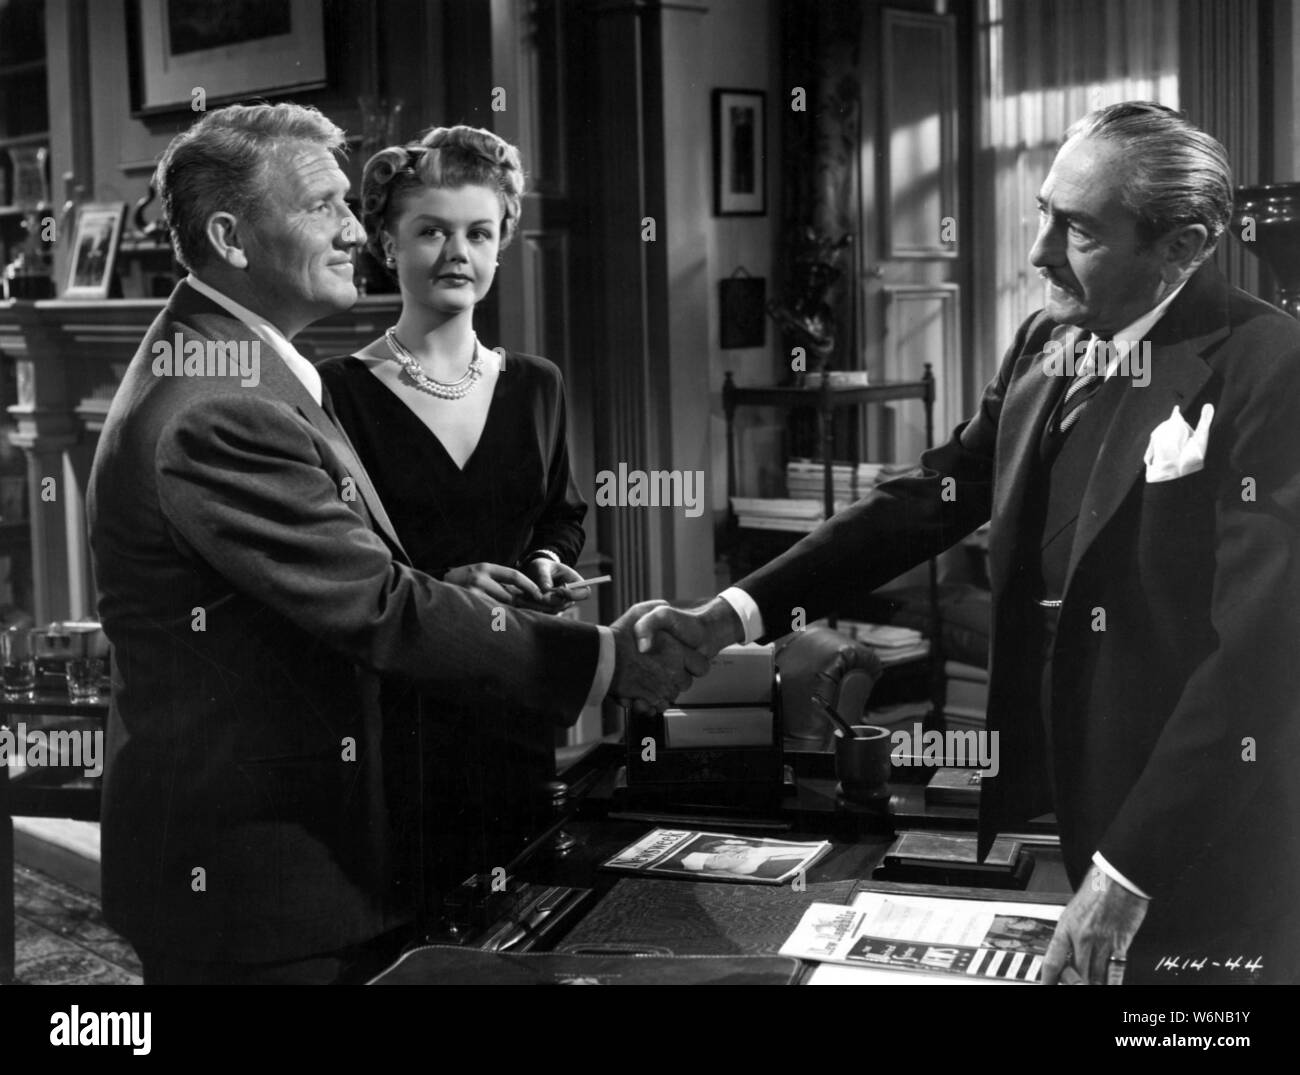 SPENCER TRACY , ANGELA LANSBURY and ADOLPHE MENJOU in STATE OF THE UNION (1948), directed by FRANK CAPRA. Credit: M.G.M / Album Stock Photo